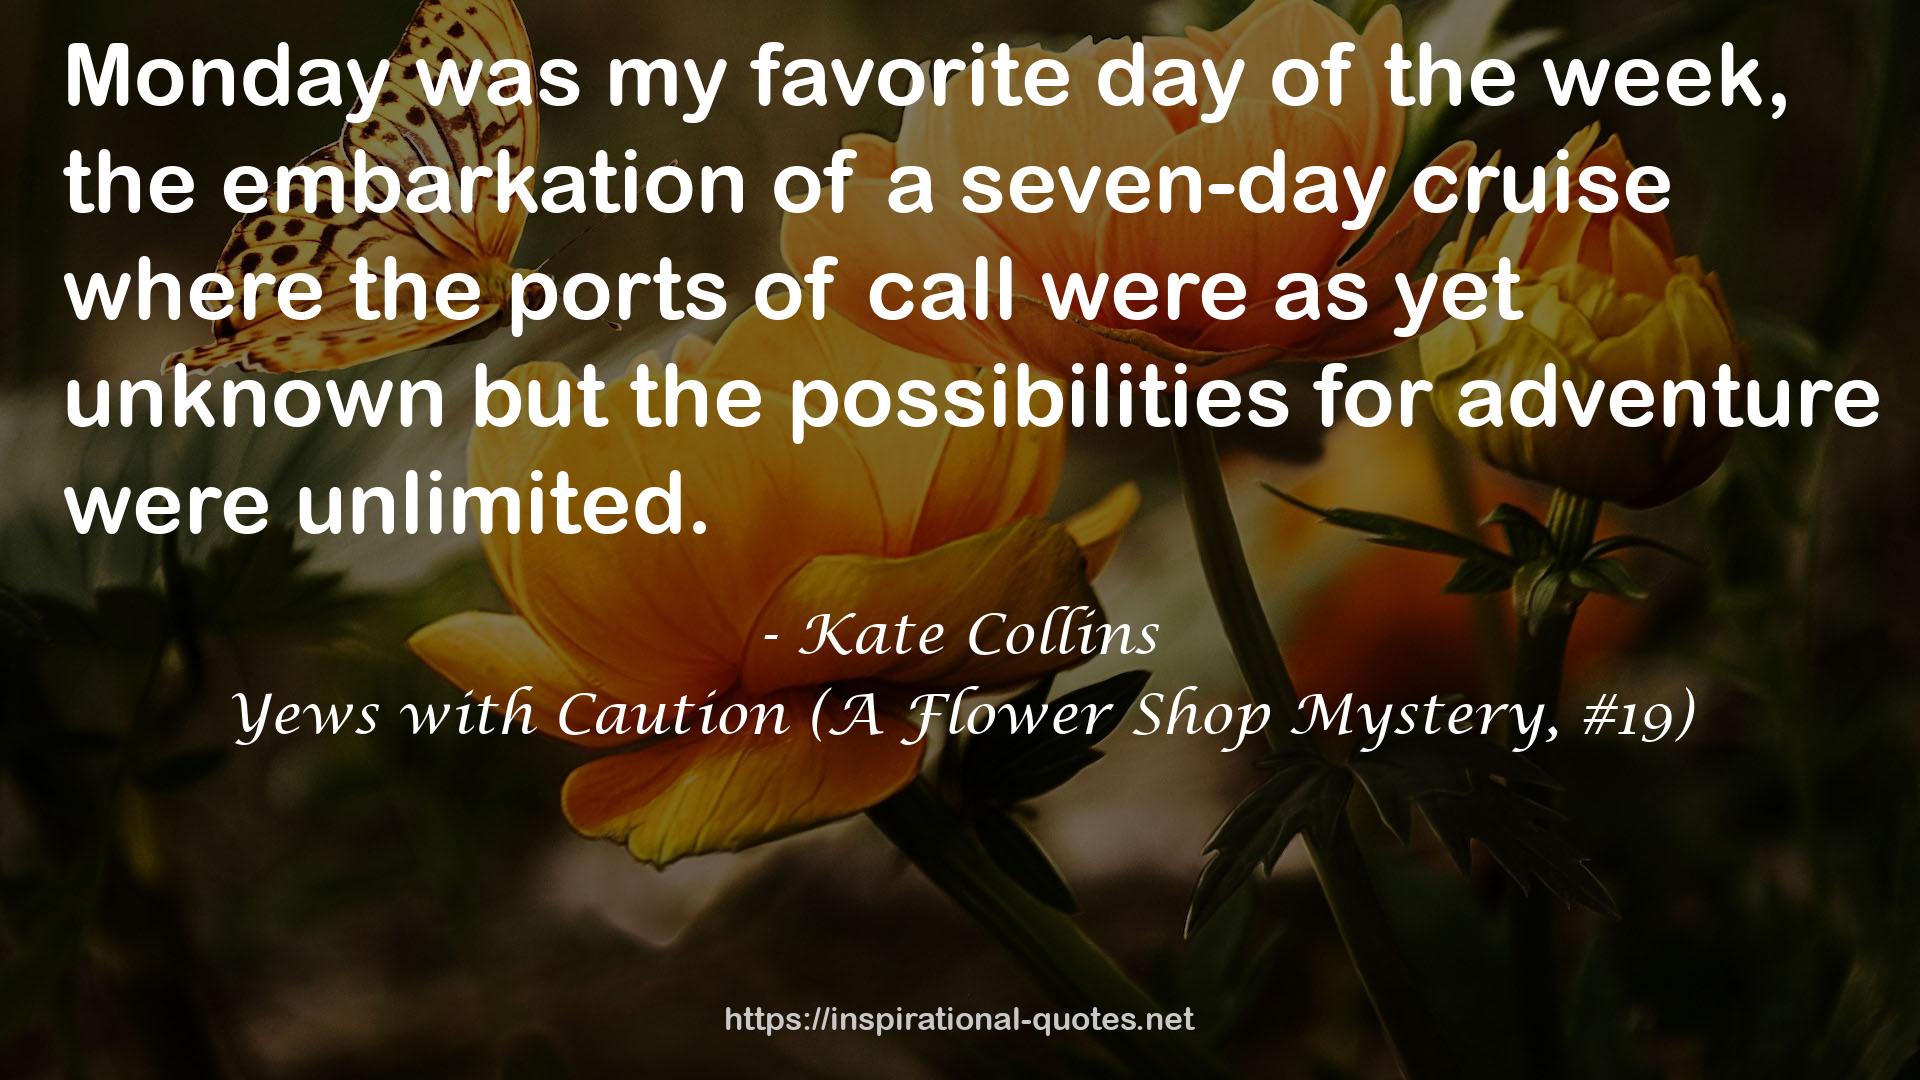 Yews with Caution (A Flower Shop Mystery, #19) QUOTES